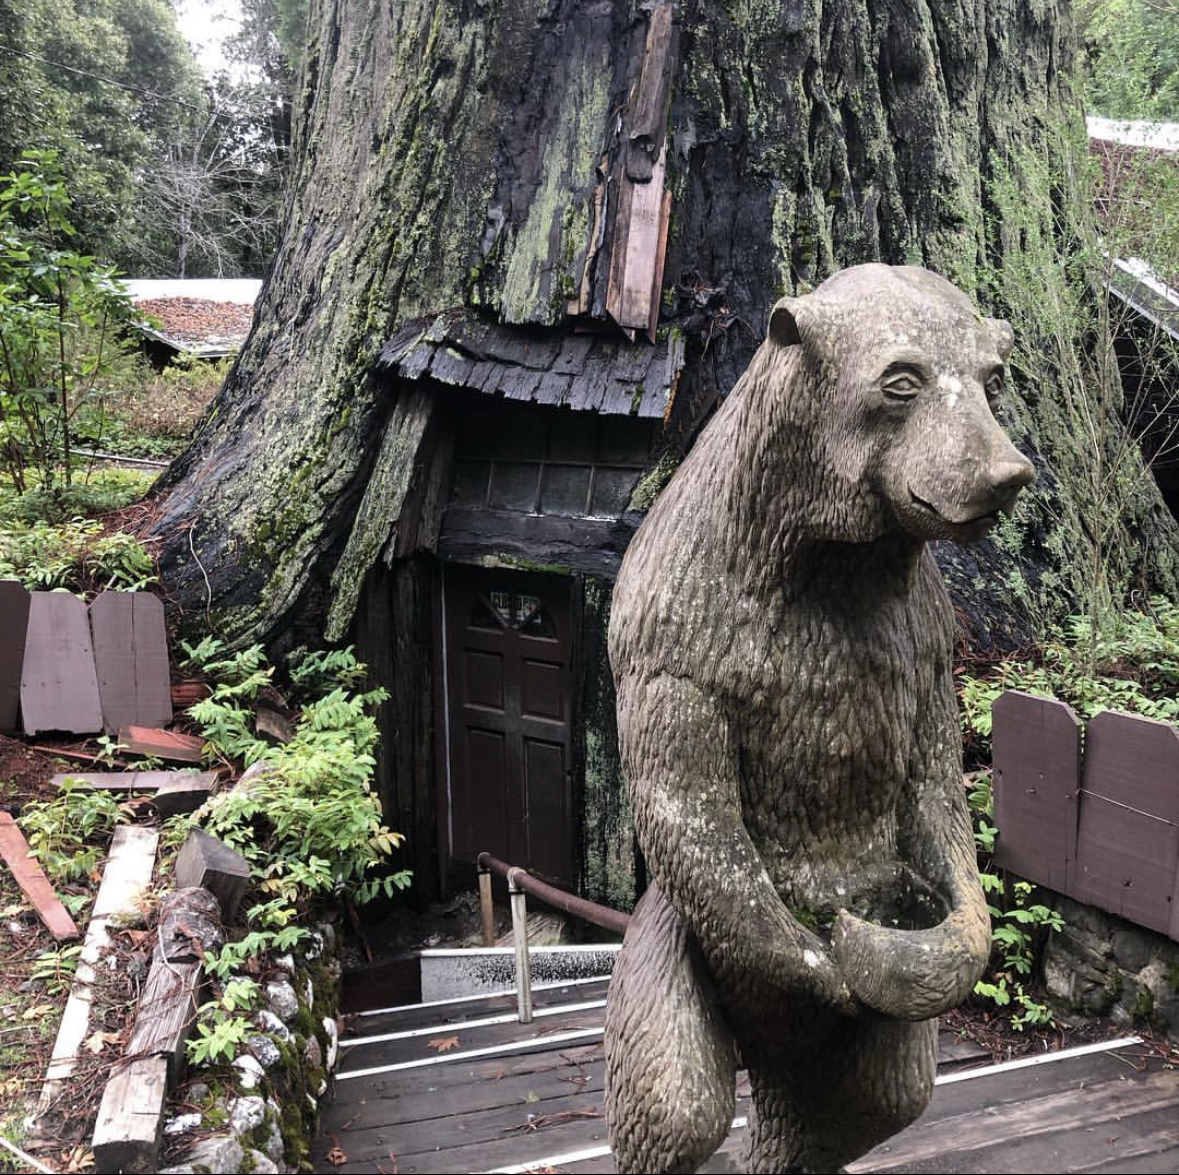 3 Retro Roadside Attractions- World Famous Tree House- @thevanpirechronicles